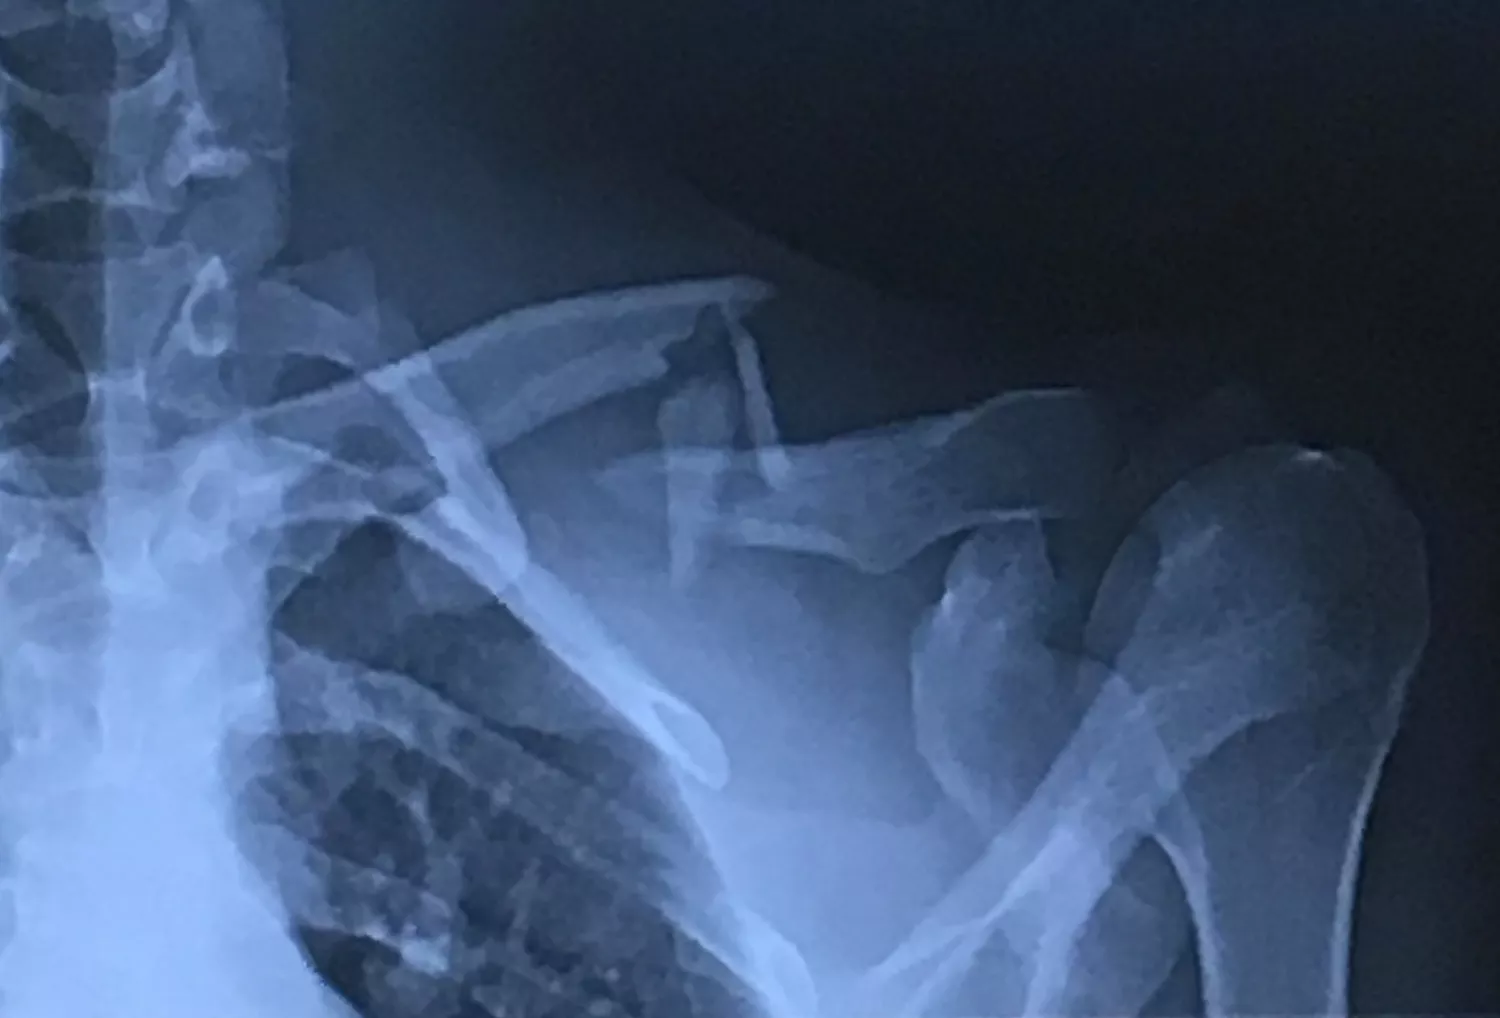 Clavicle Fracture Treatment: When Is Surgery Necessary?